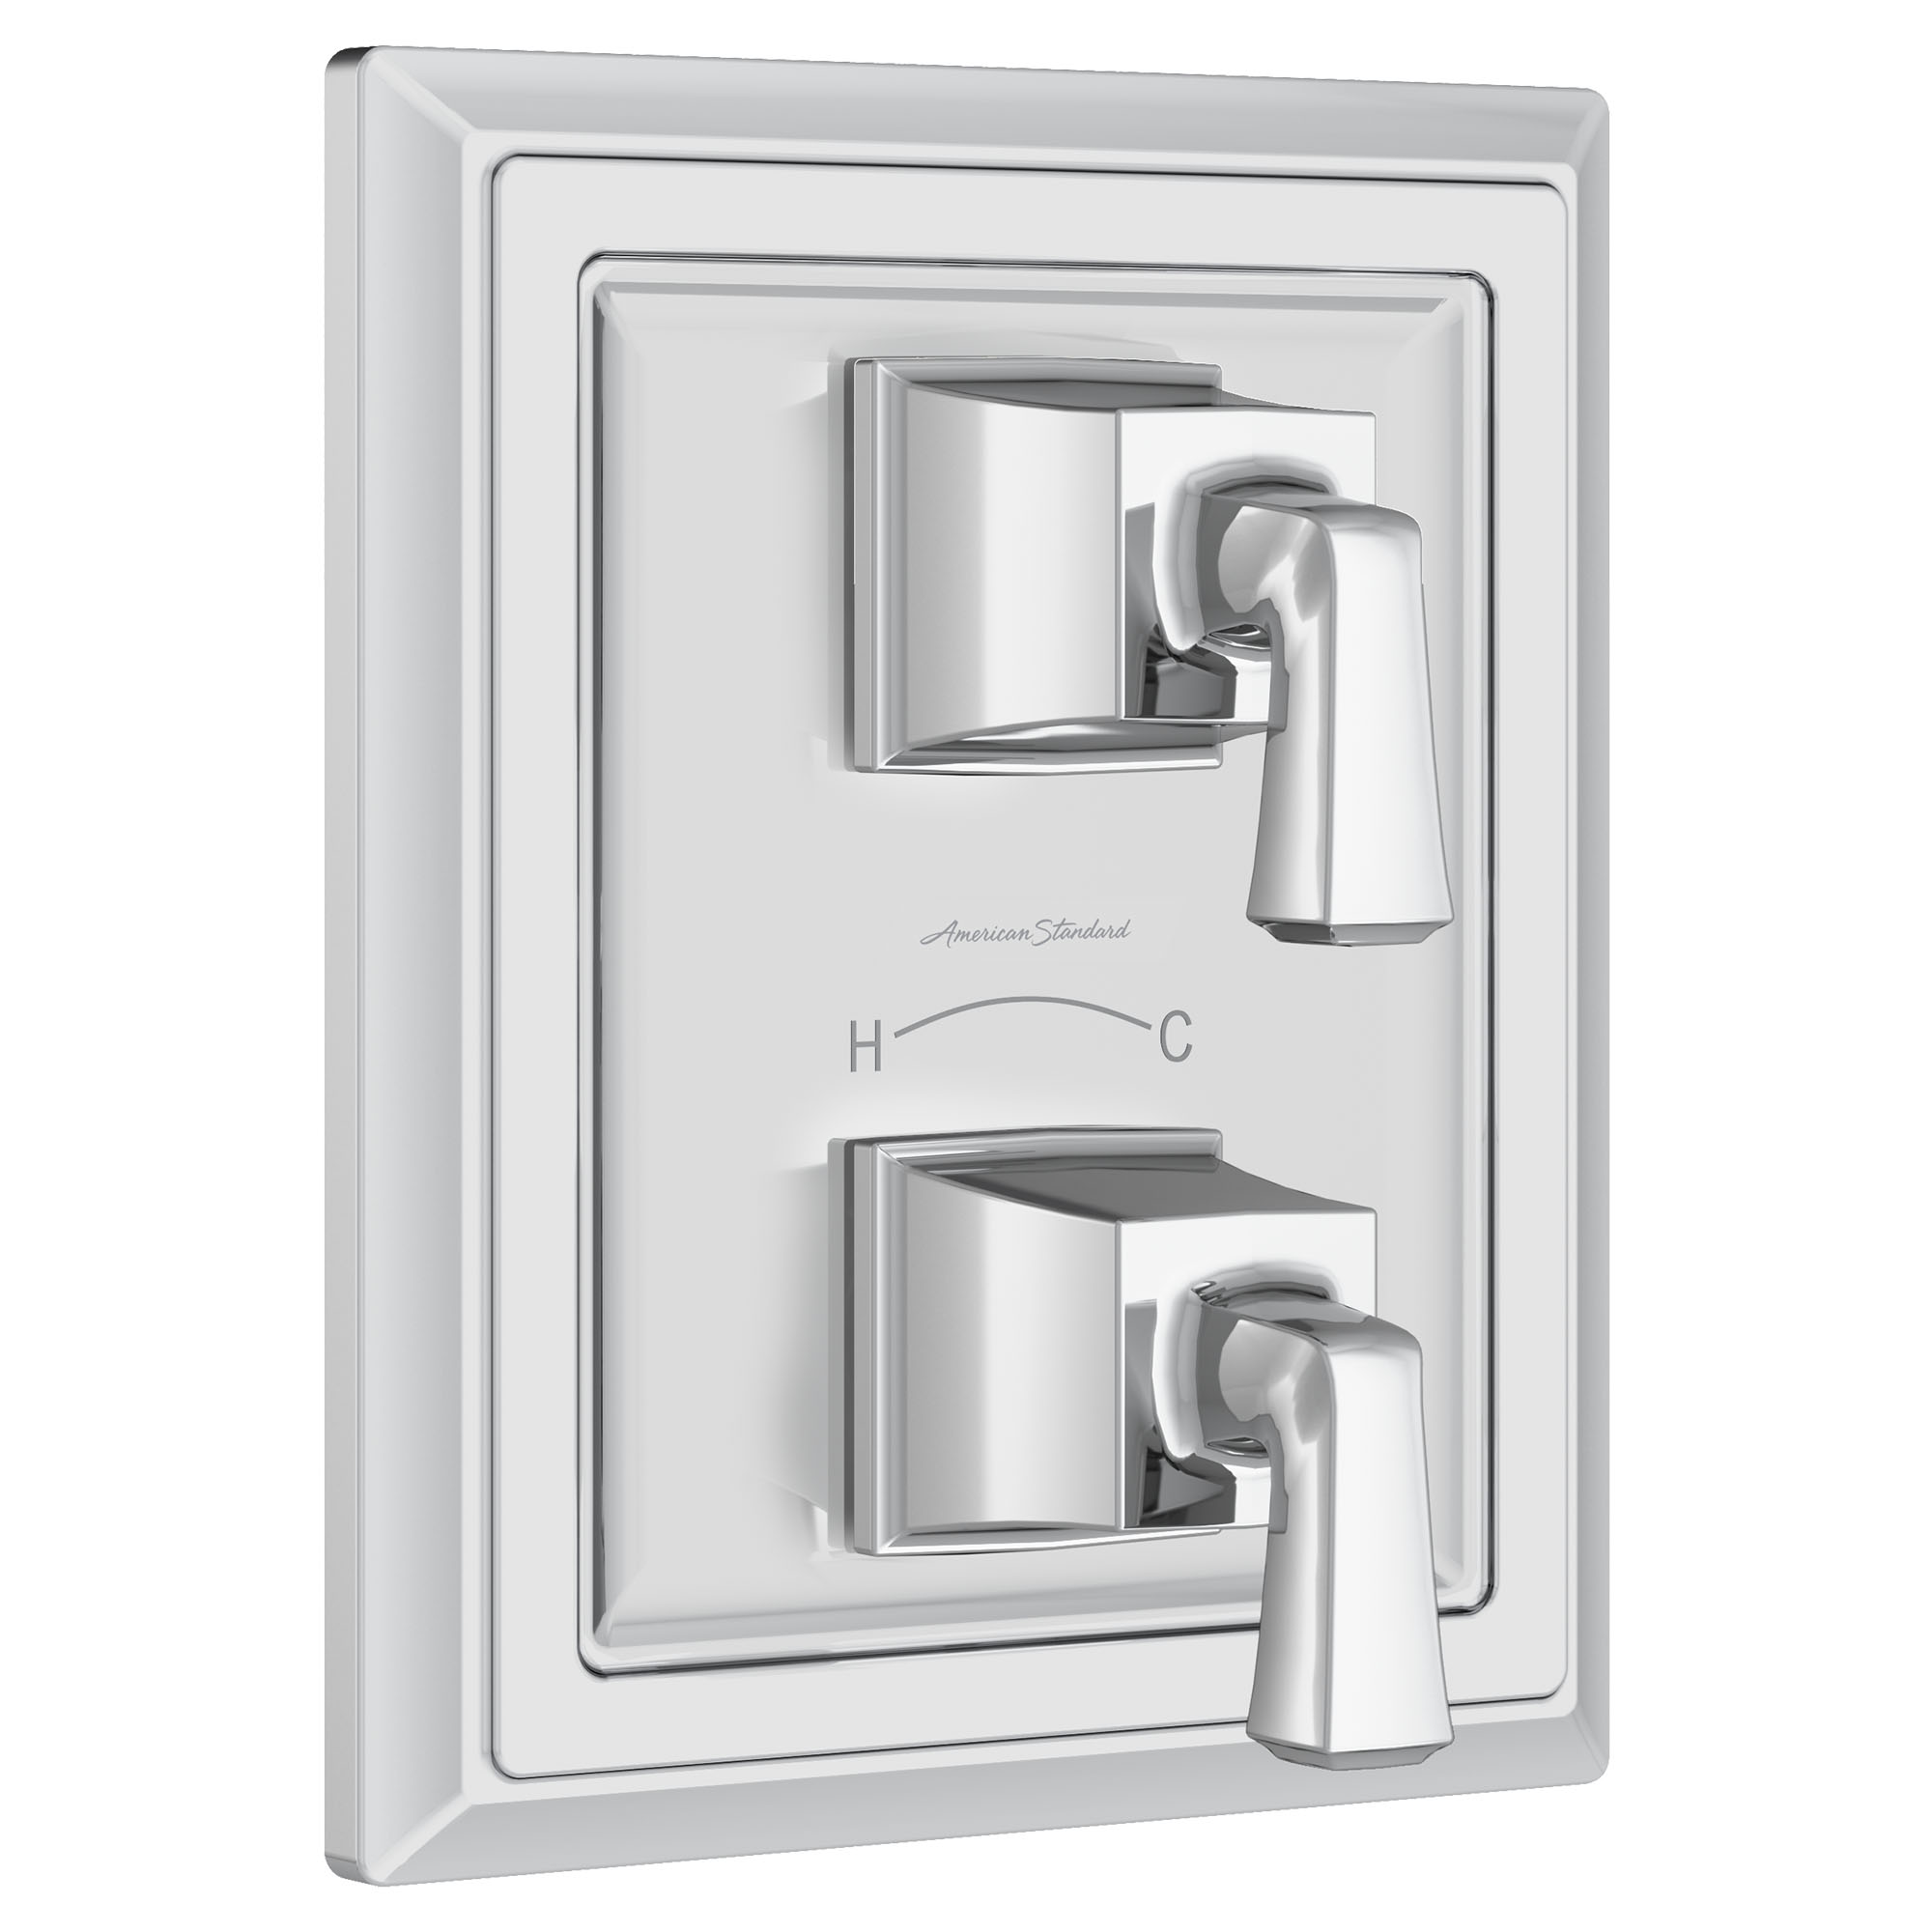 Town Square S Two-Handle Thermostat Shower Valve Trim Kit